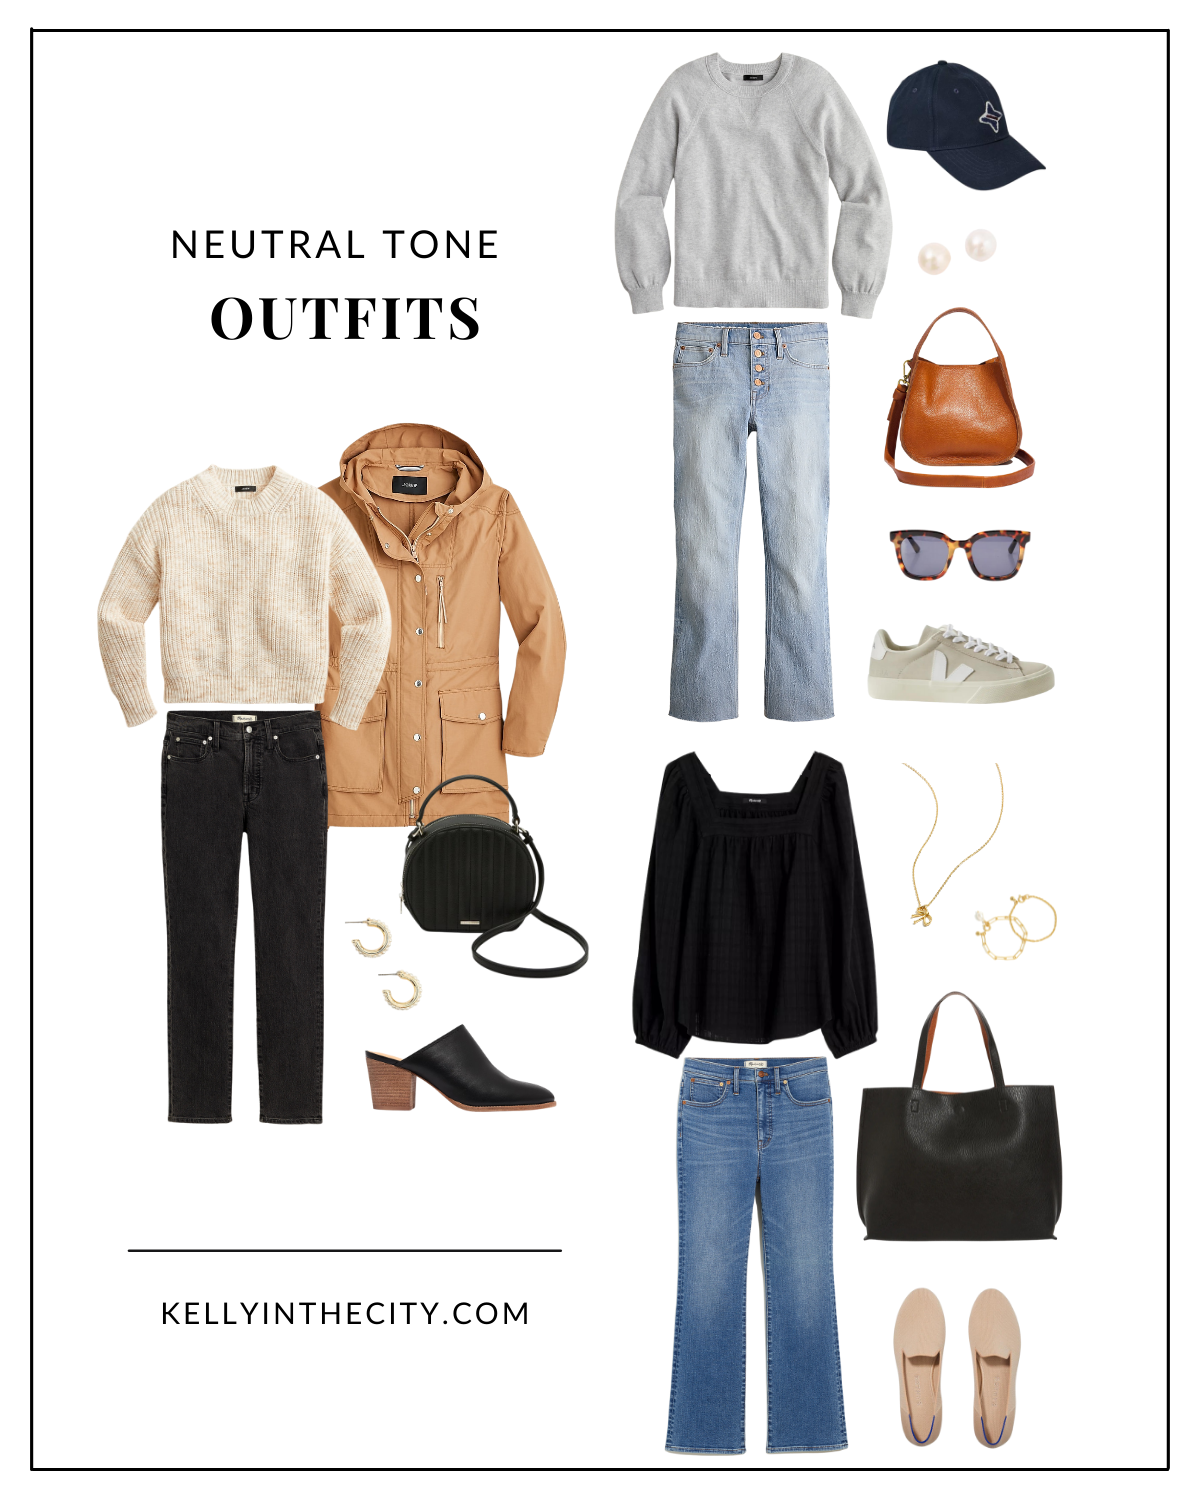 3 Neutral Tone Outfits | Kelly in the City | Lifestyle Blog